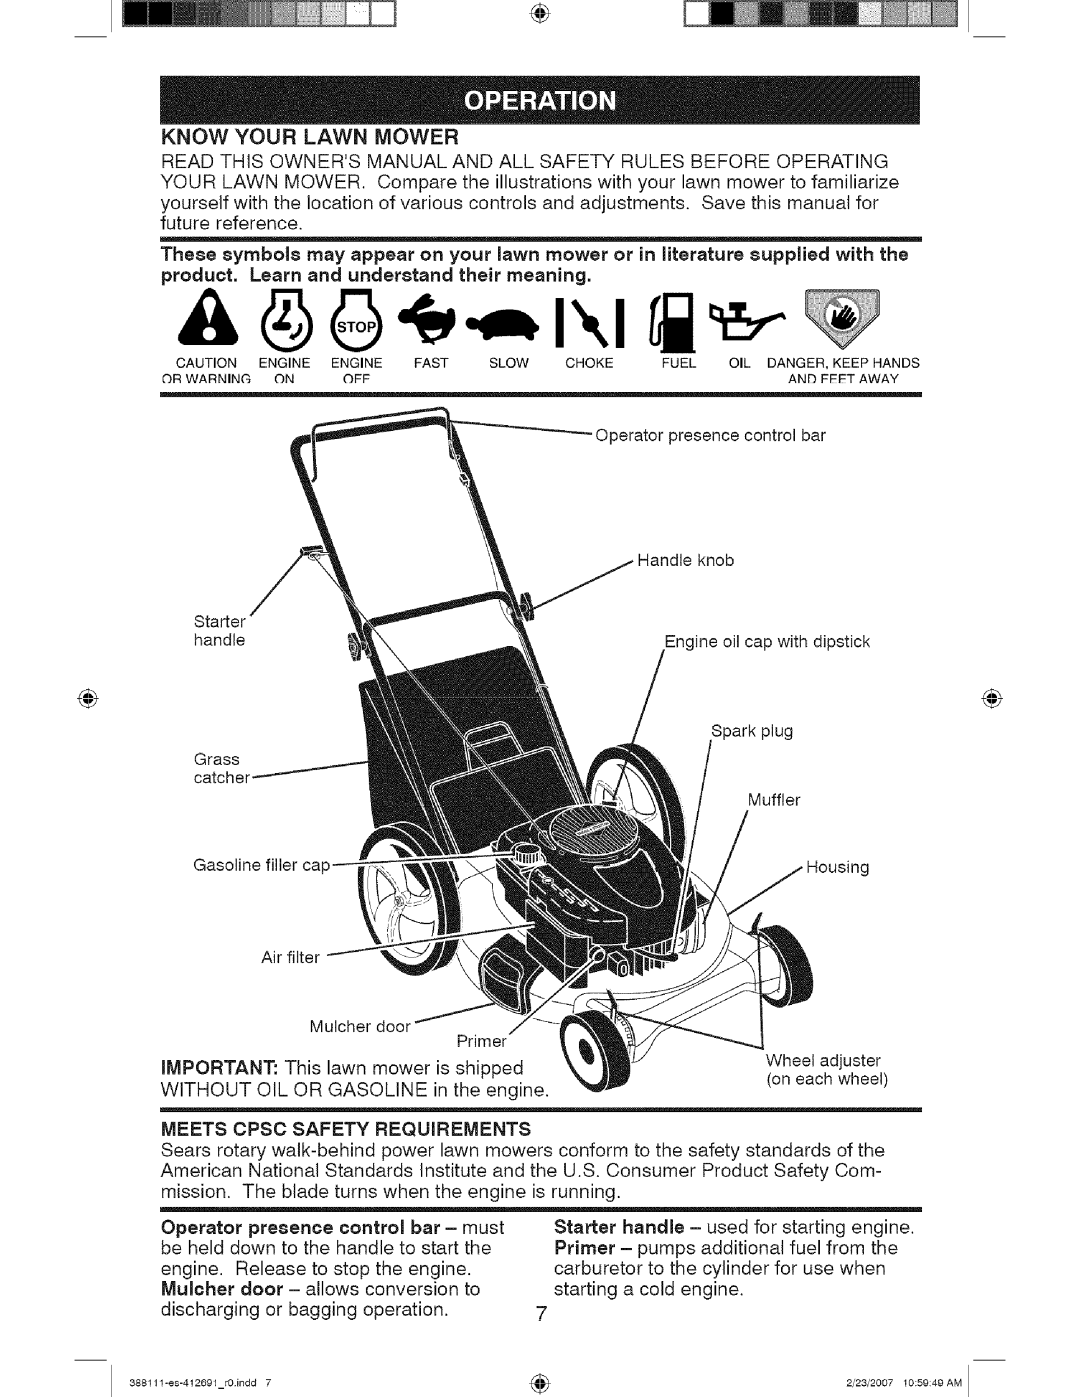 Craftsman 917 388111 owner manual Know Your Lawn Mower 